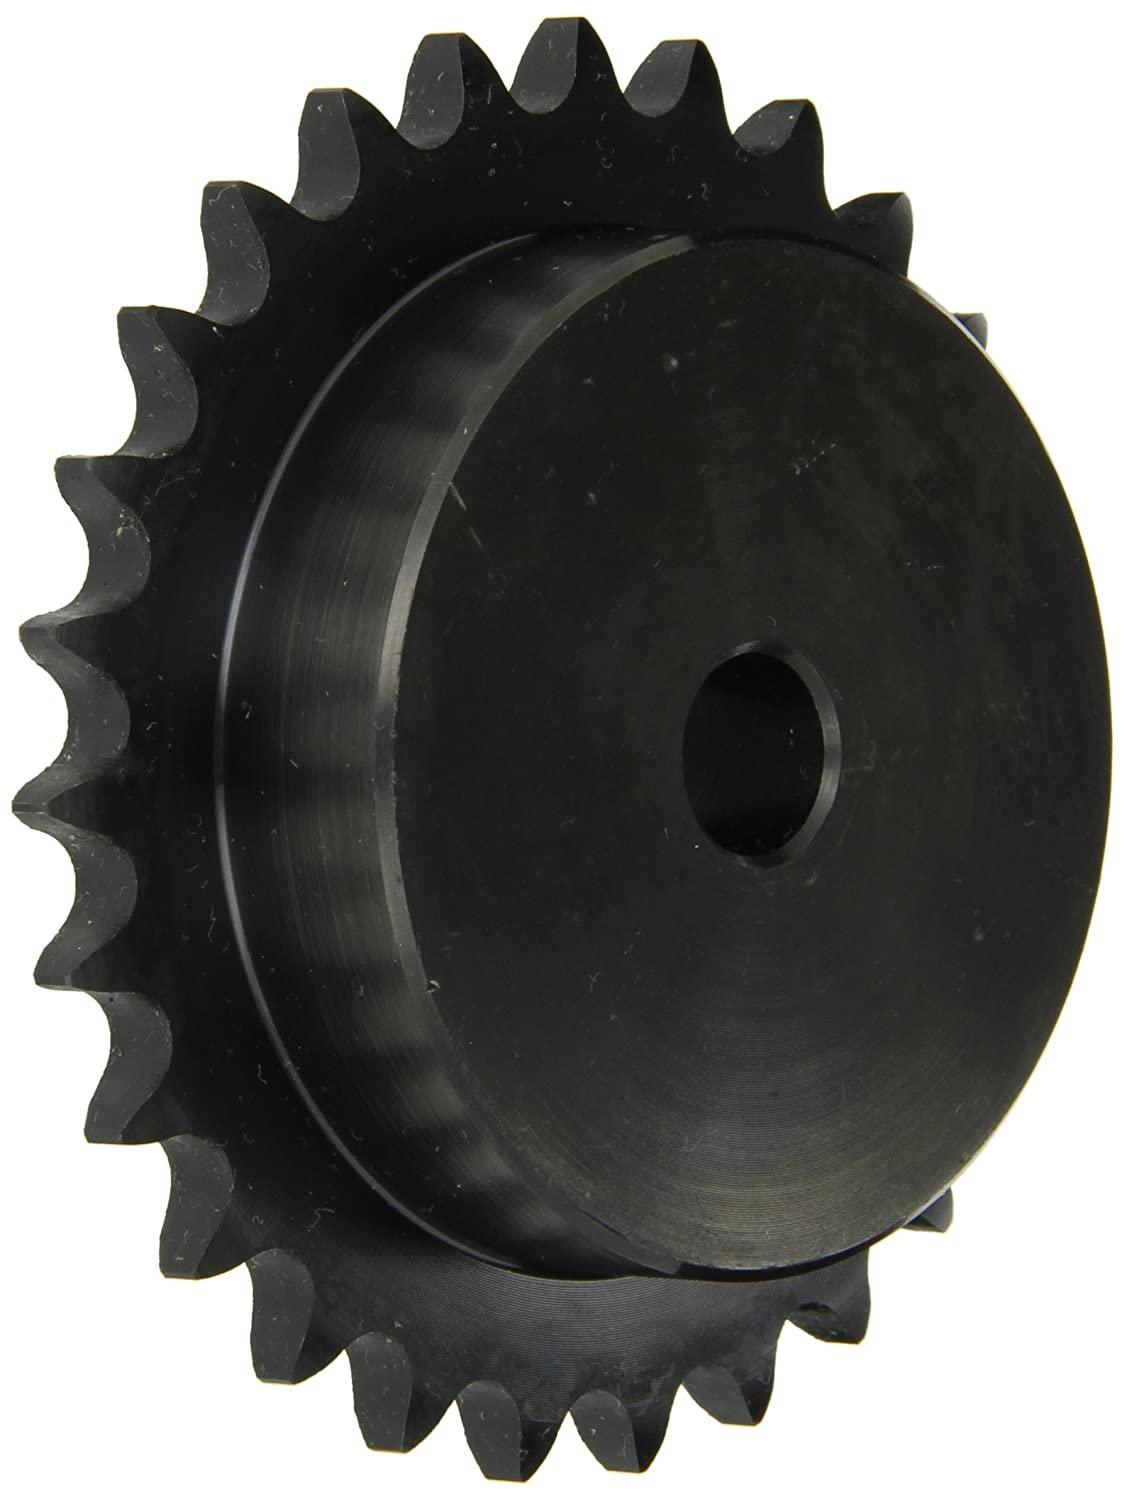 25B25 Roller Chain Sprocket With Stock Bore - Forces Inc